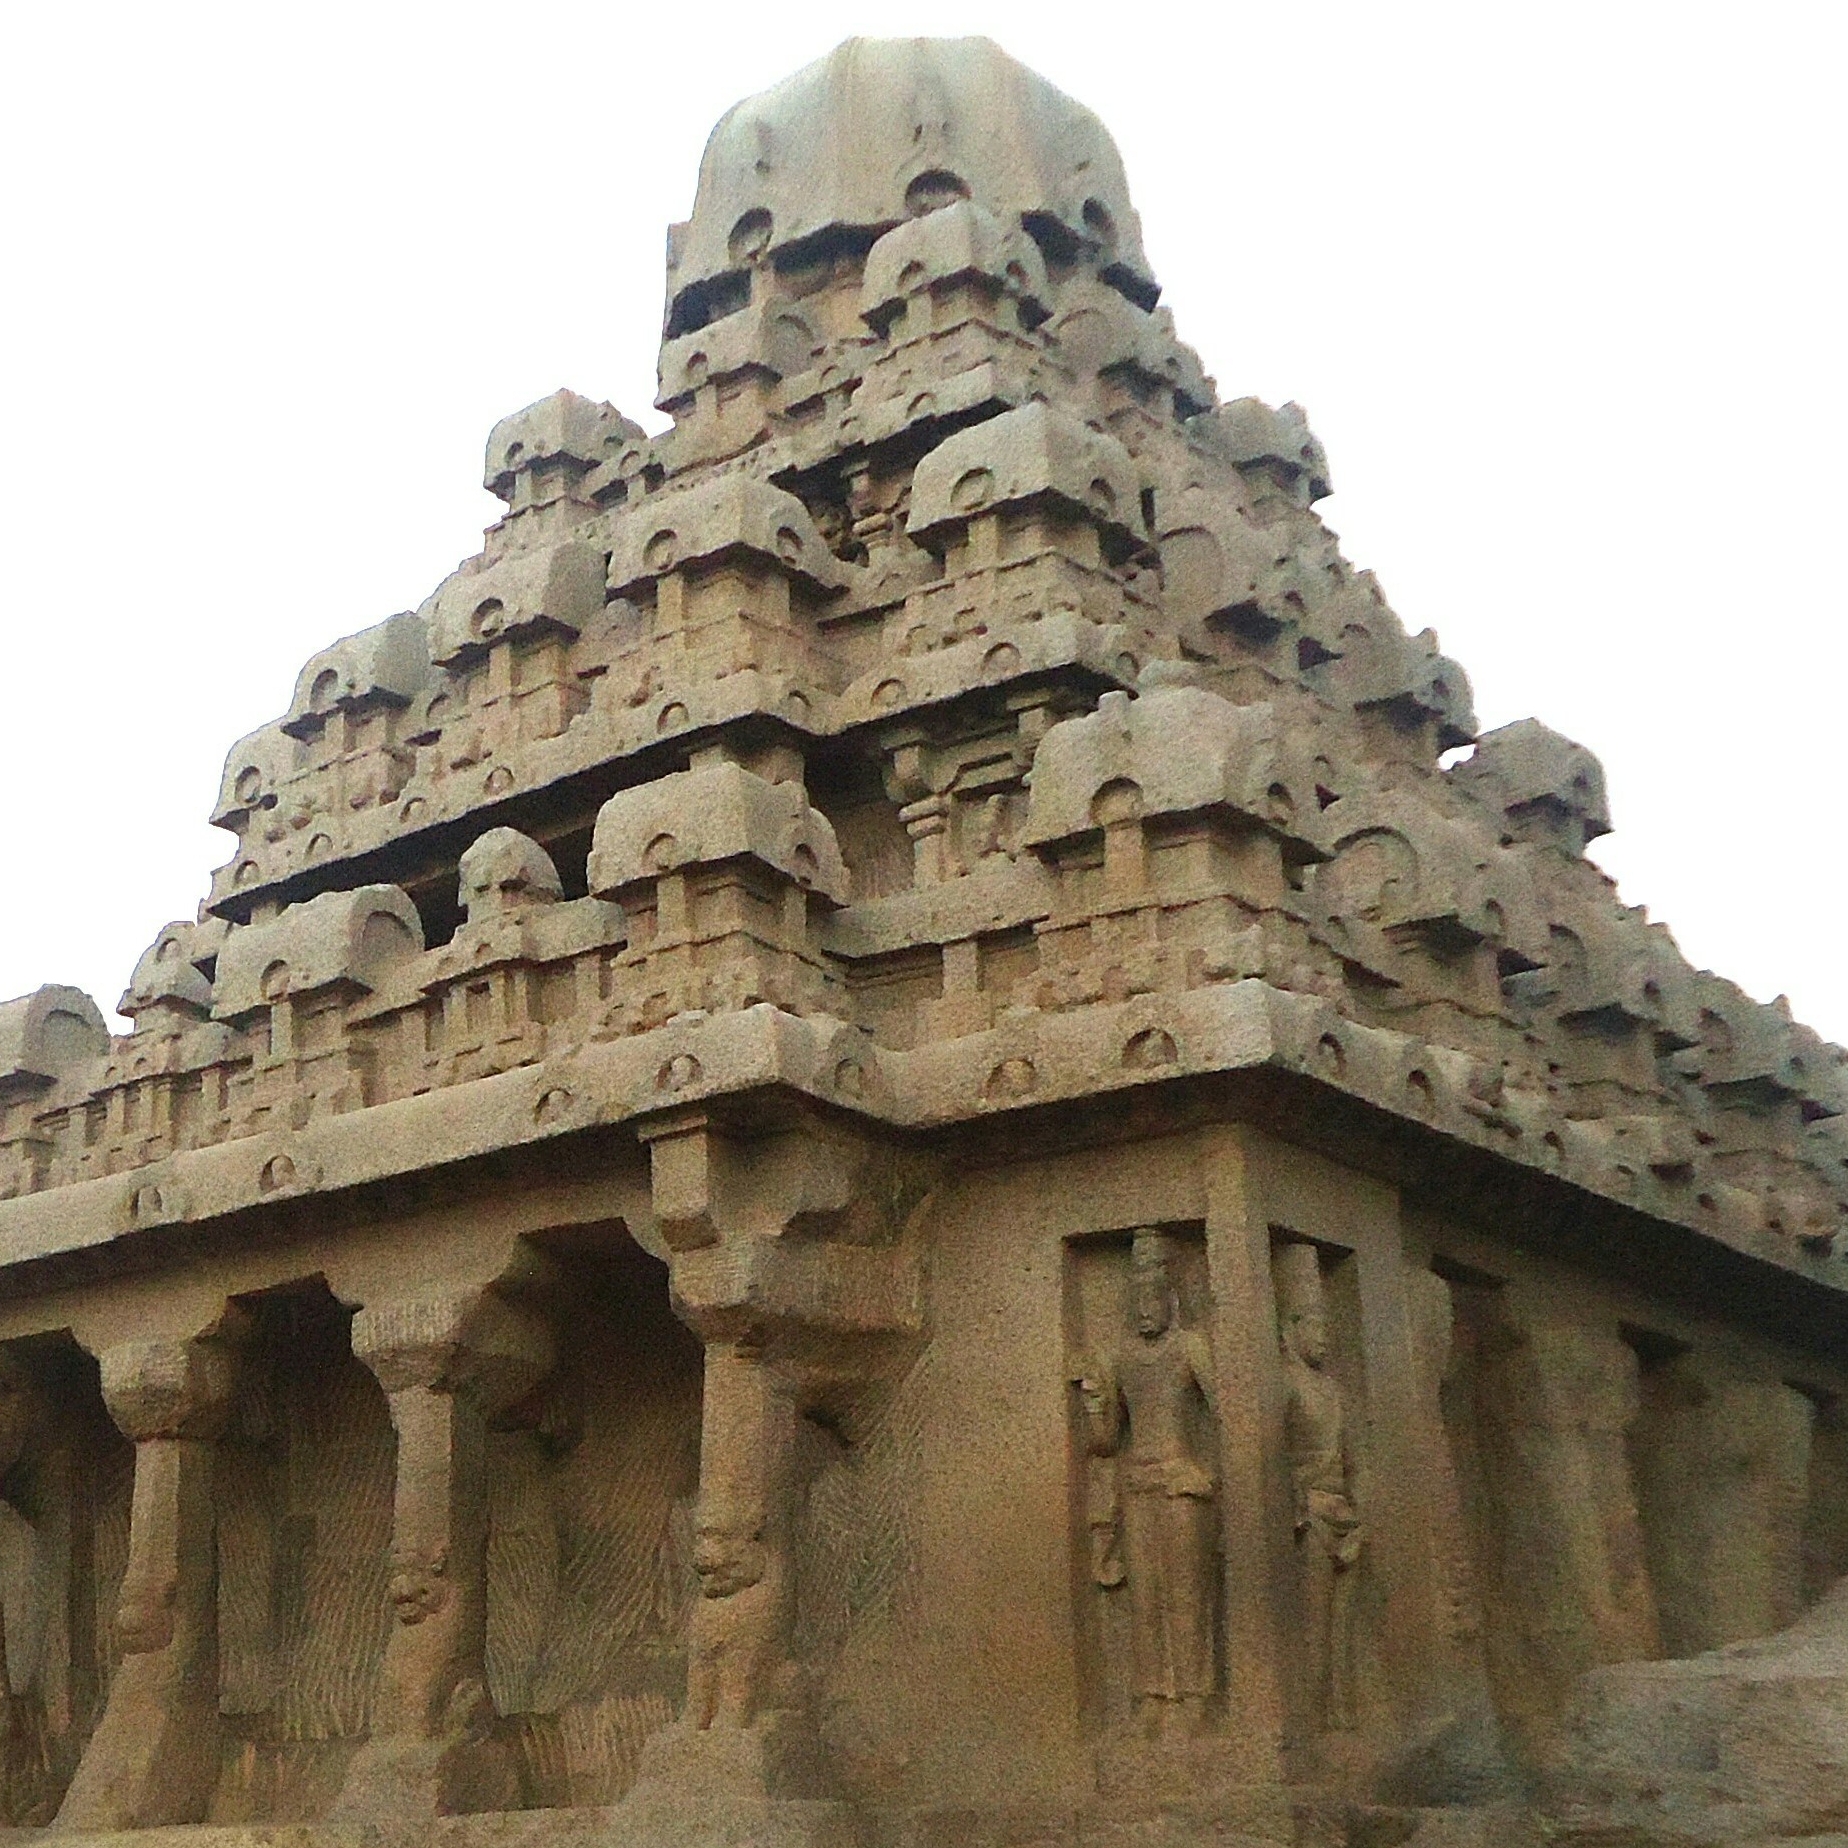 Mahabalipuram - A picture of one of the seven pagodas